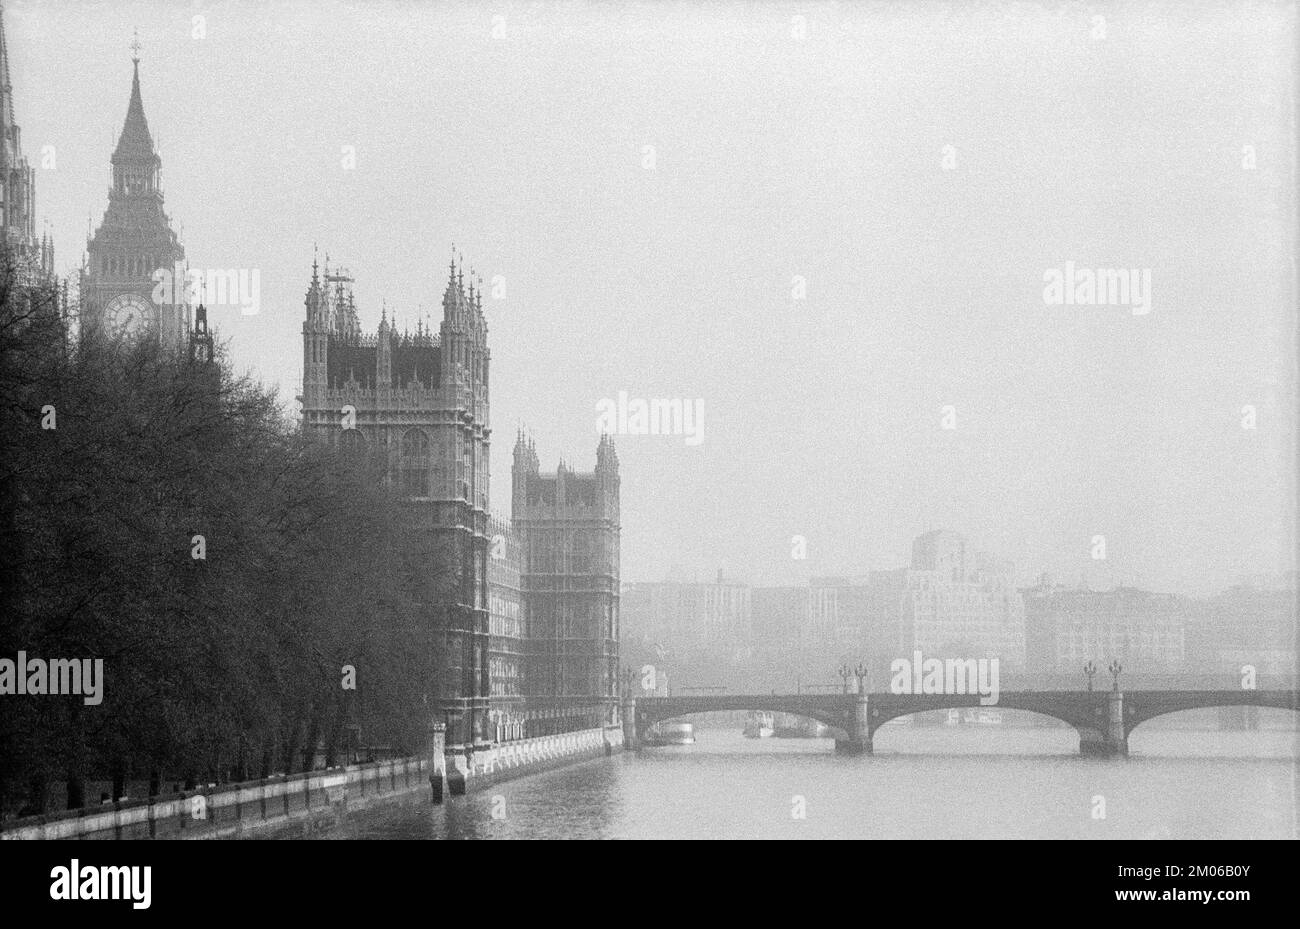 1978 black & white archive image of the Houses of Parliament, River Thames and Westminster Bridge, London. Stock Photo